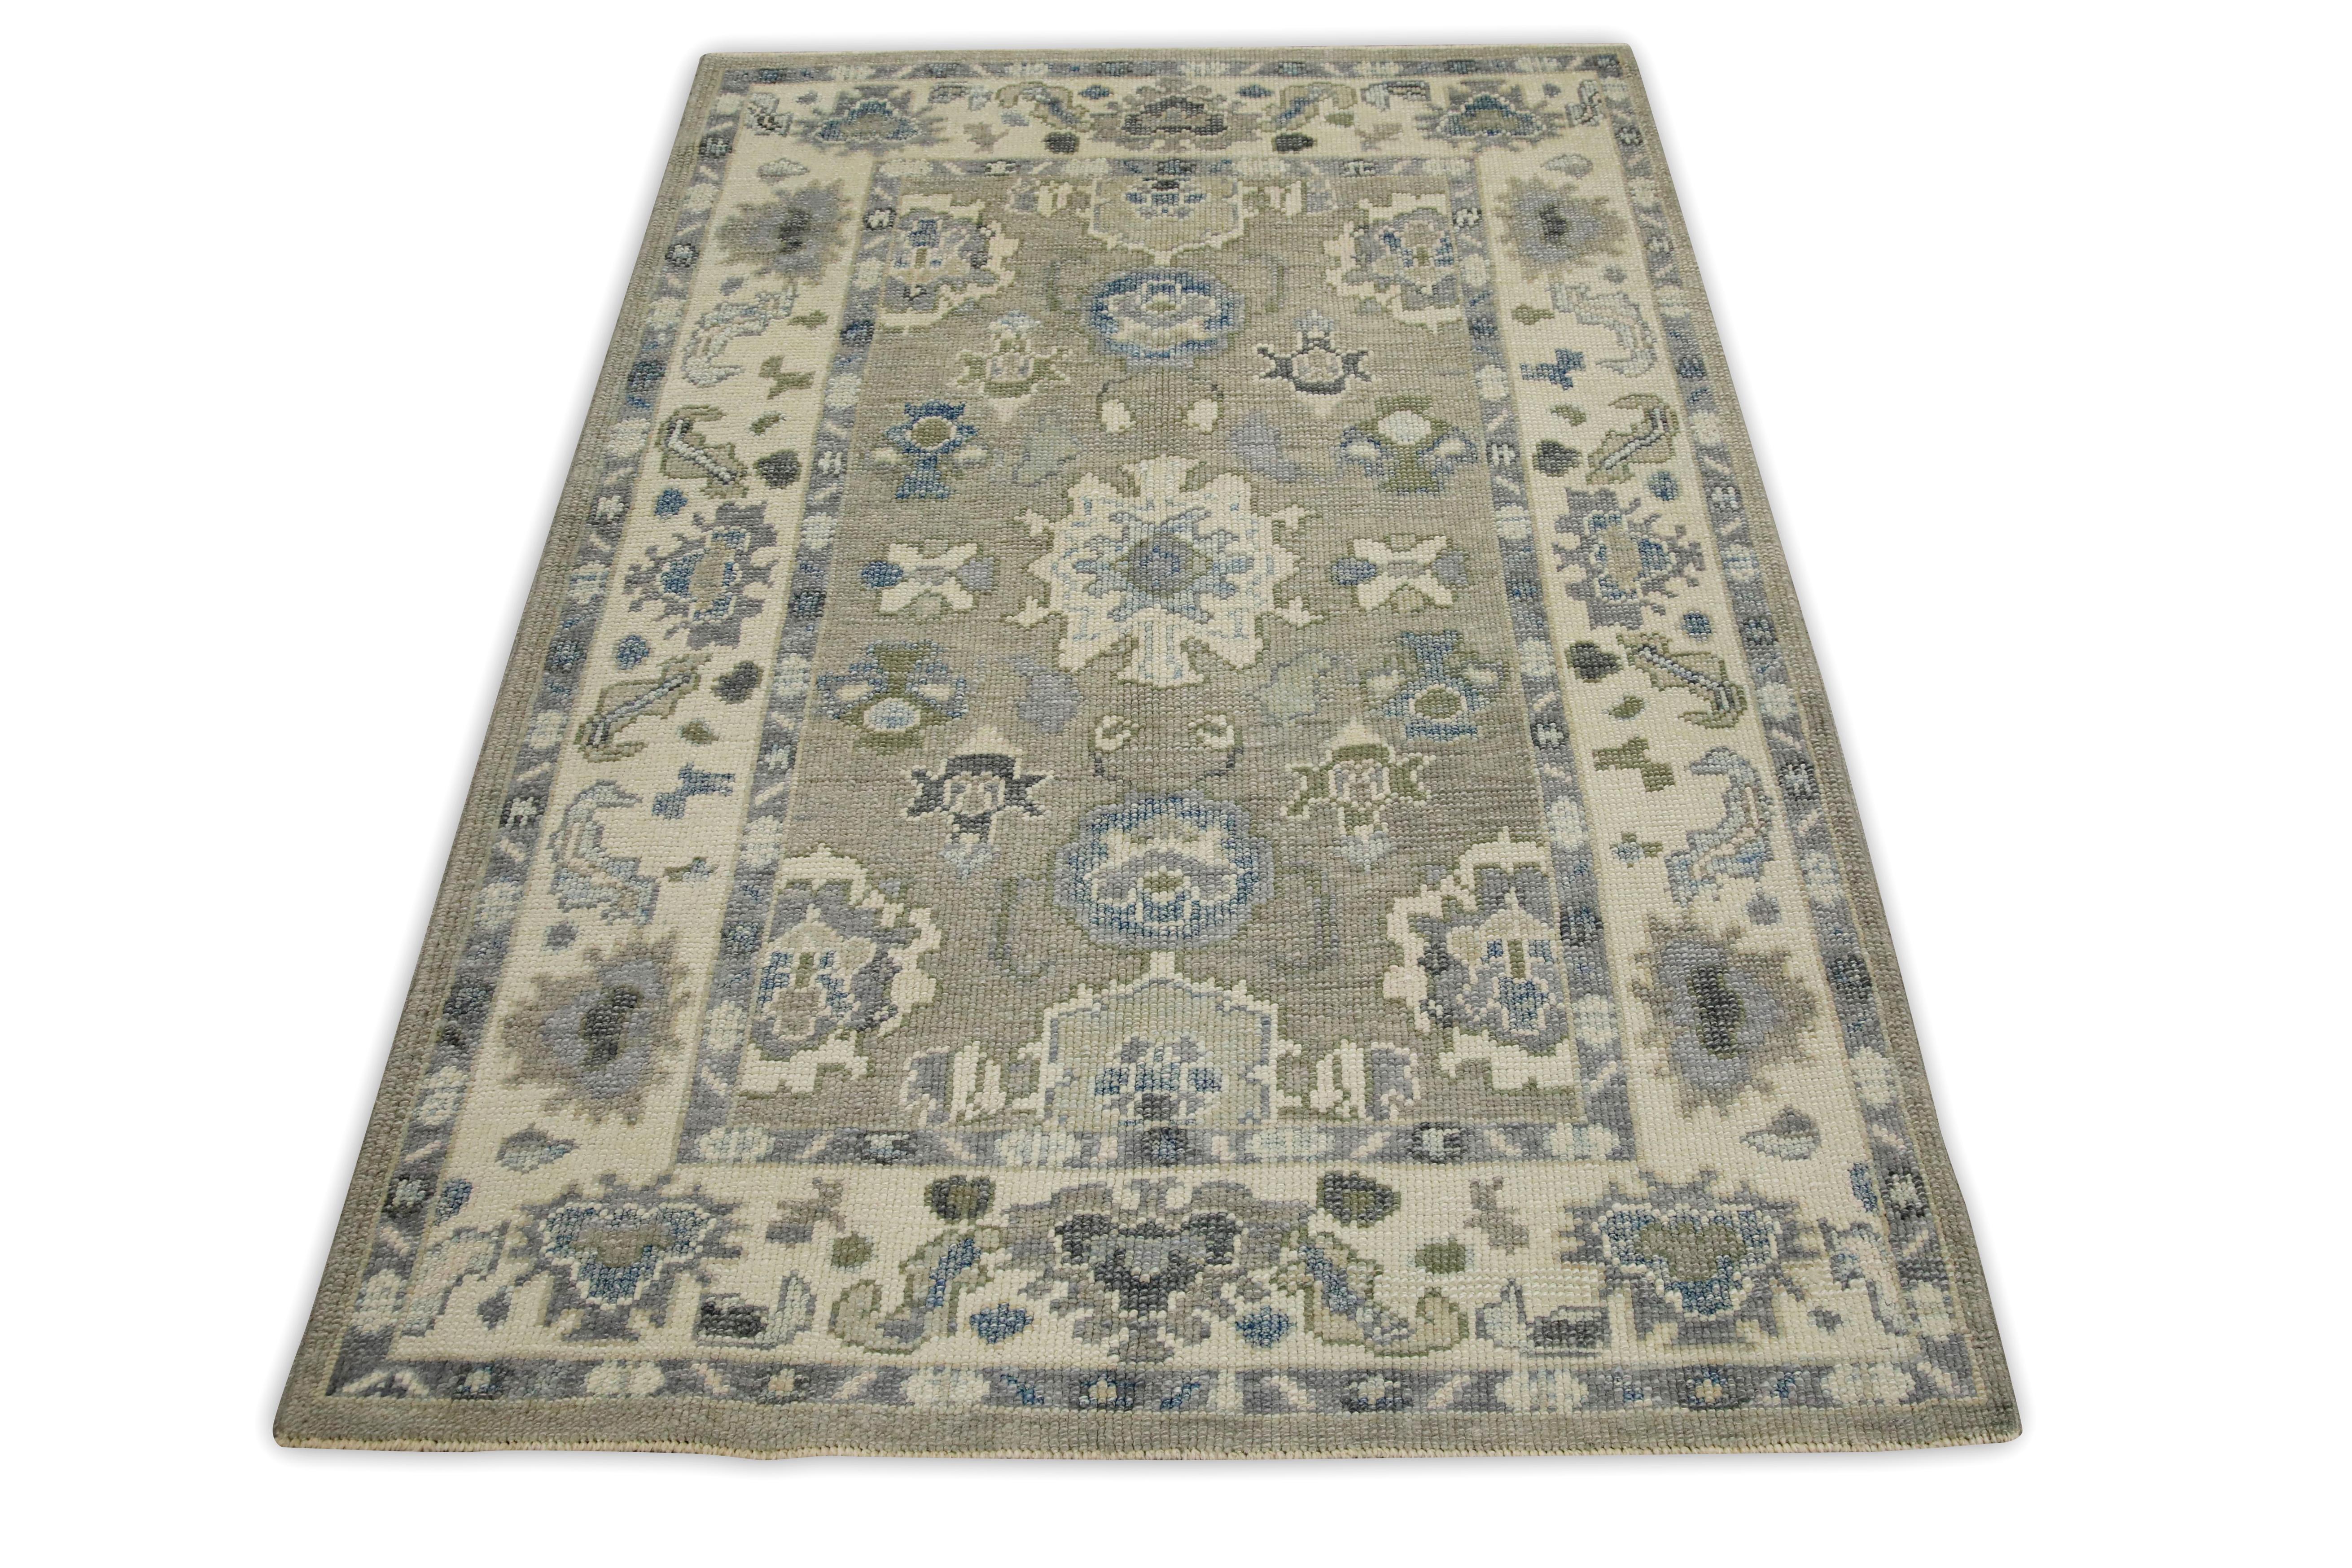 Contemporary Gray & Blue Floral Design Handwoven Wool Turkish Oushak Rug 4' x 5'8